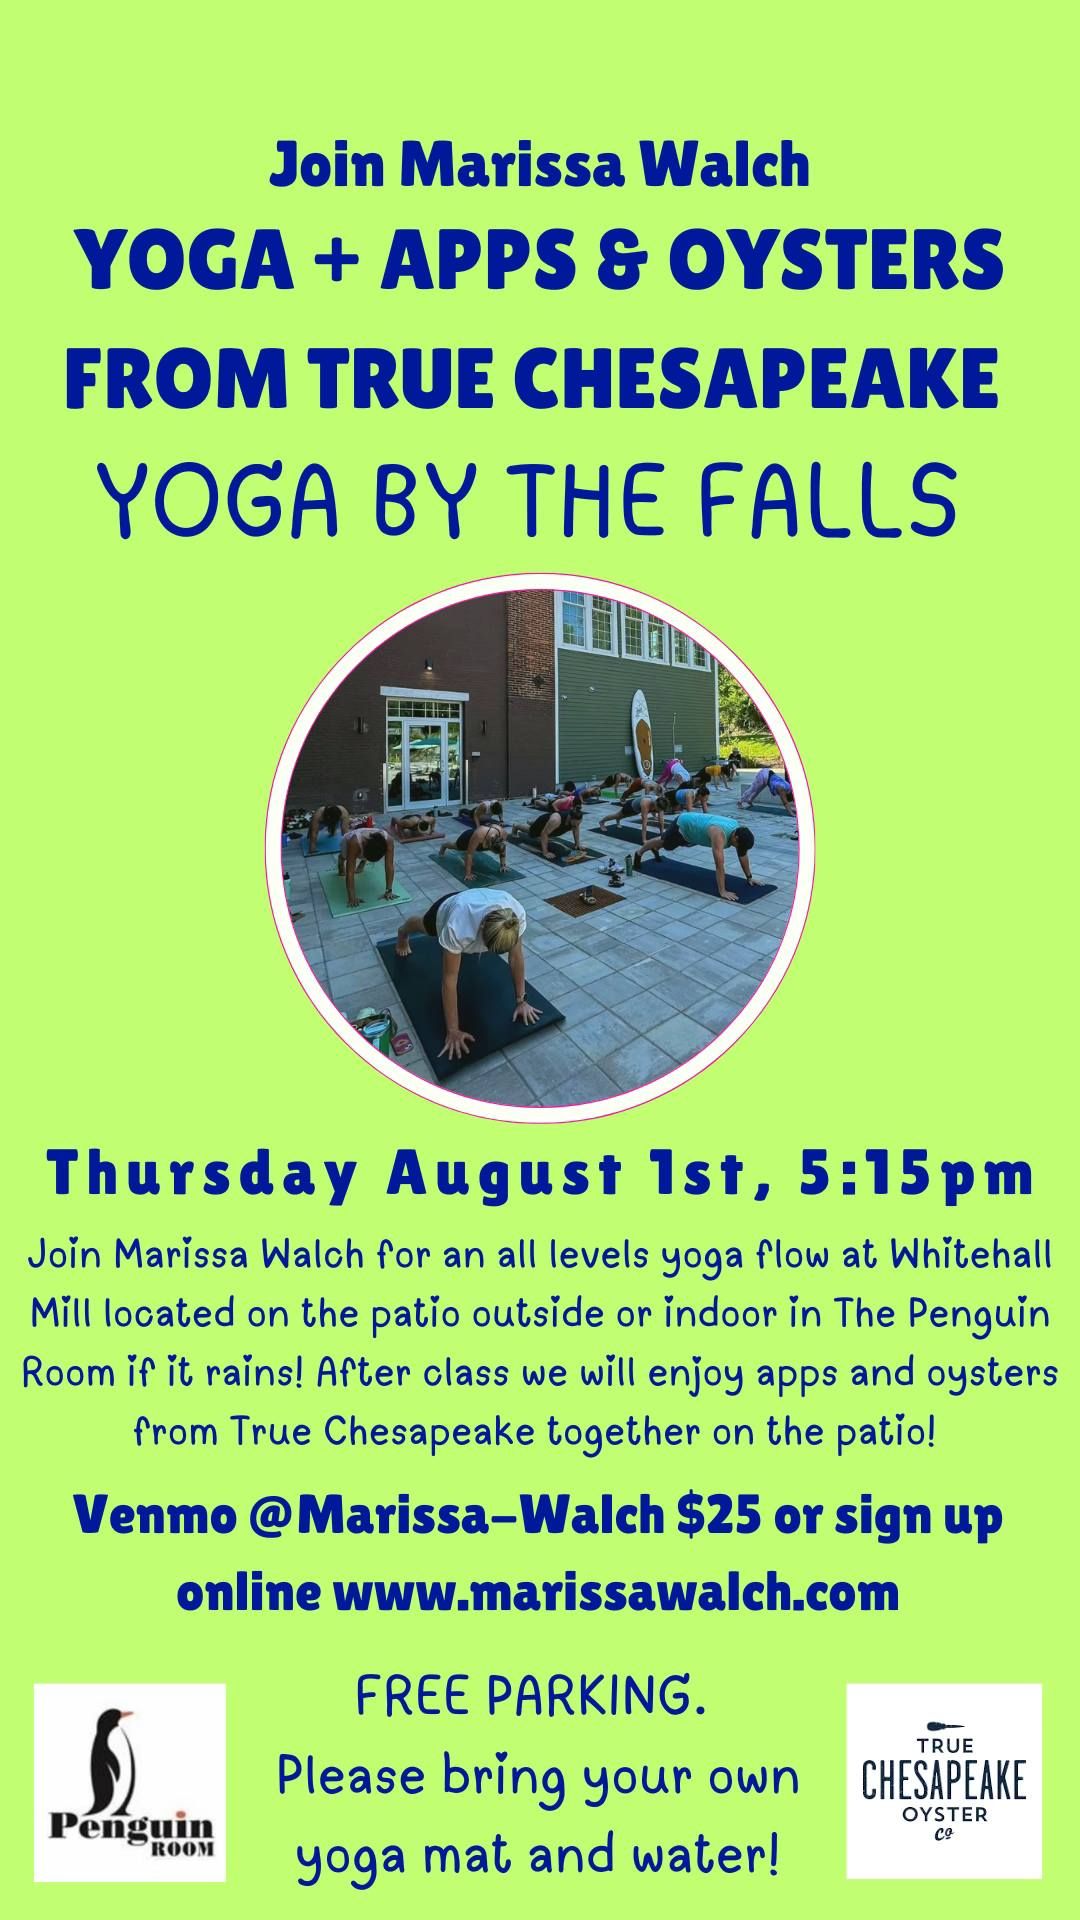 Yoga By The Falls with True Chesapeake 